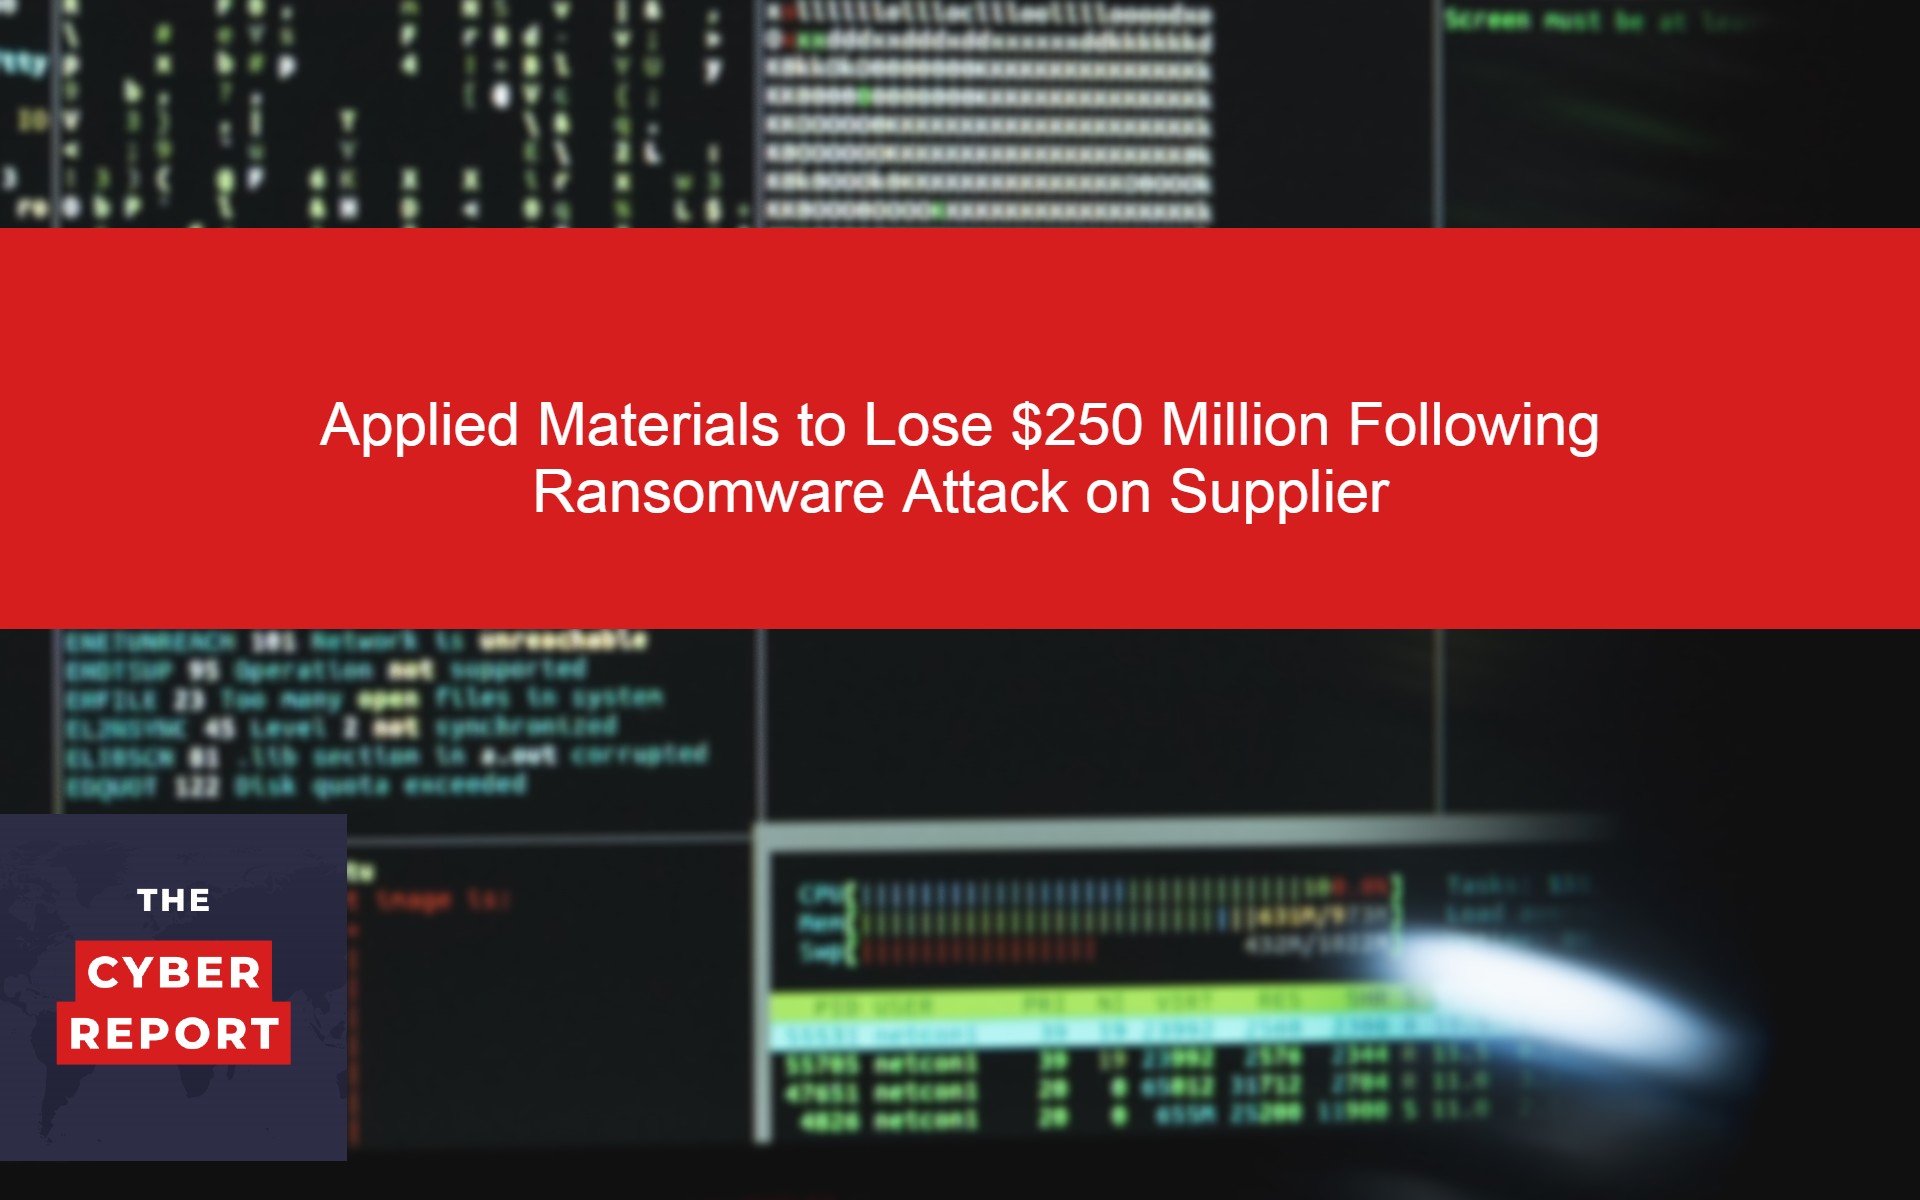 Applied Materials to Lose $250 Million Following Ransomware Attack on Supplier